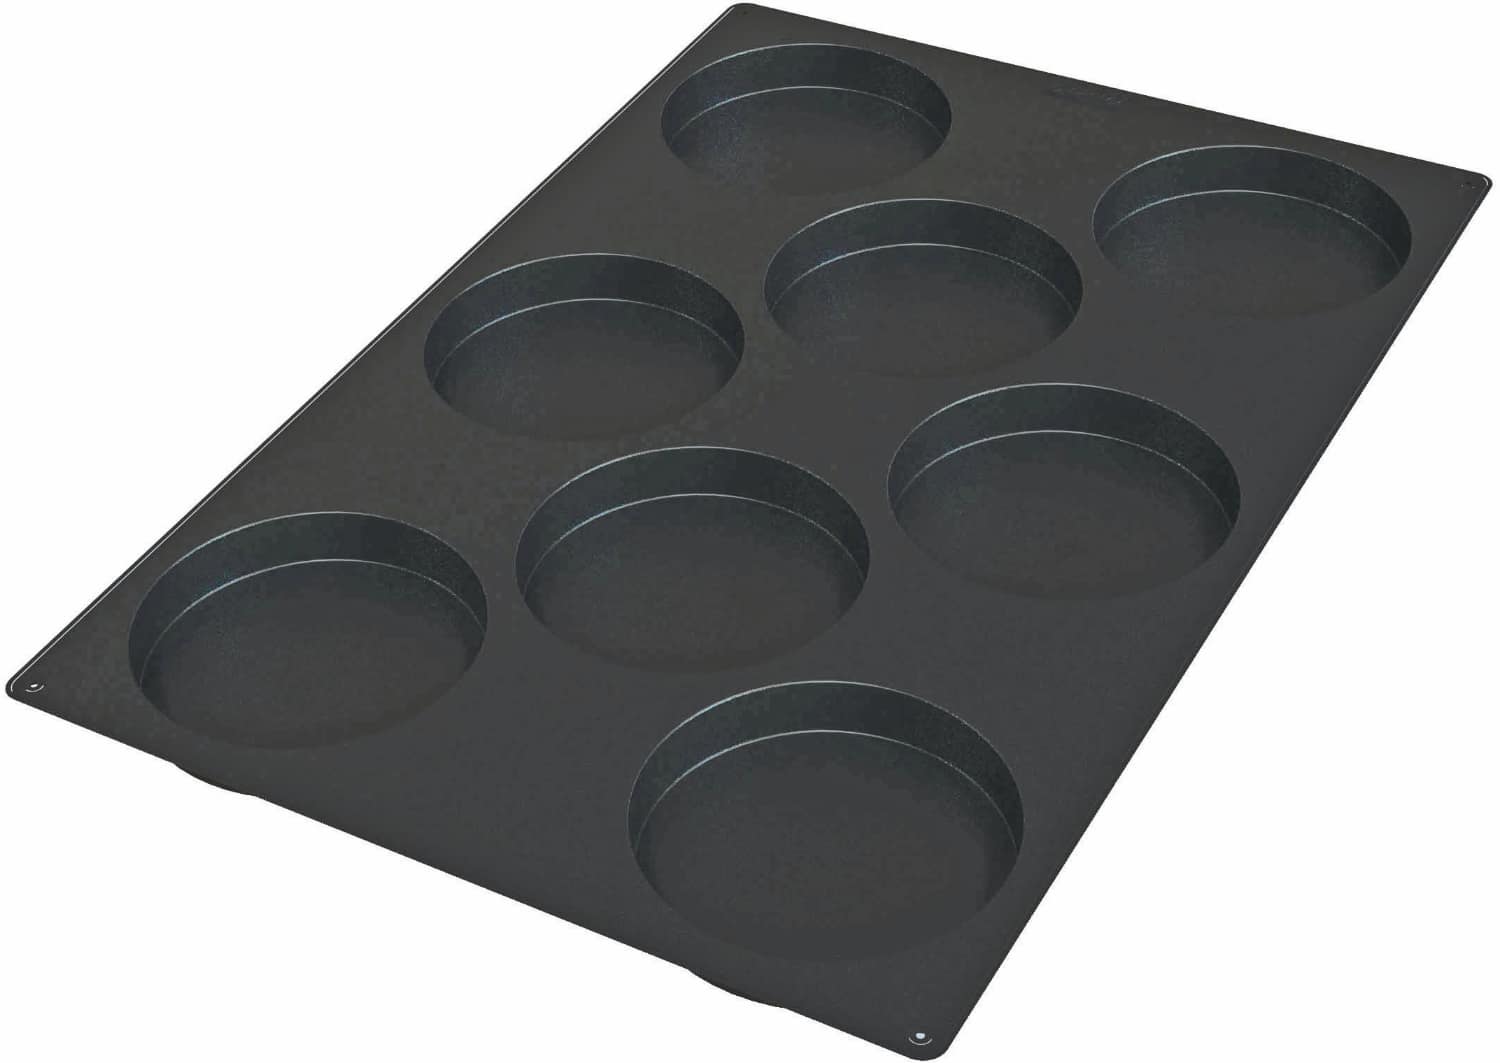 Silicone baking moulds "Sponge cake" 600 x 400 mm